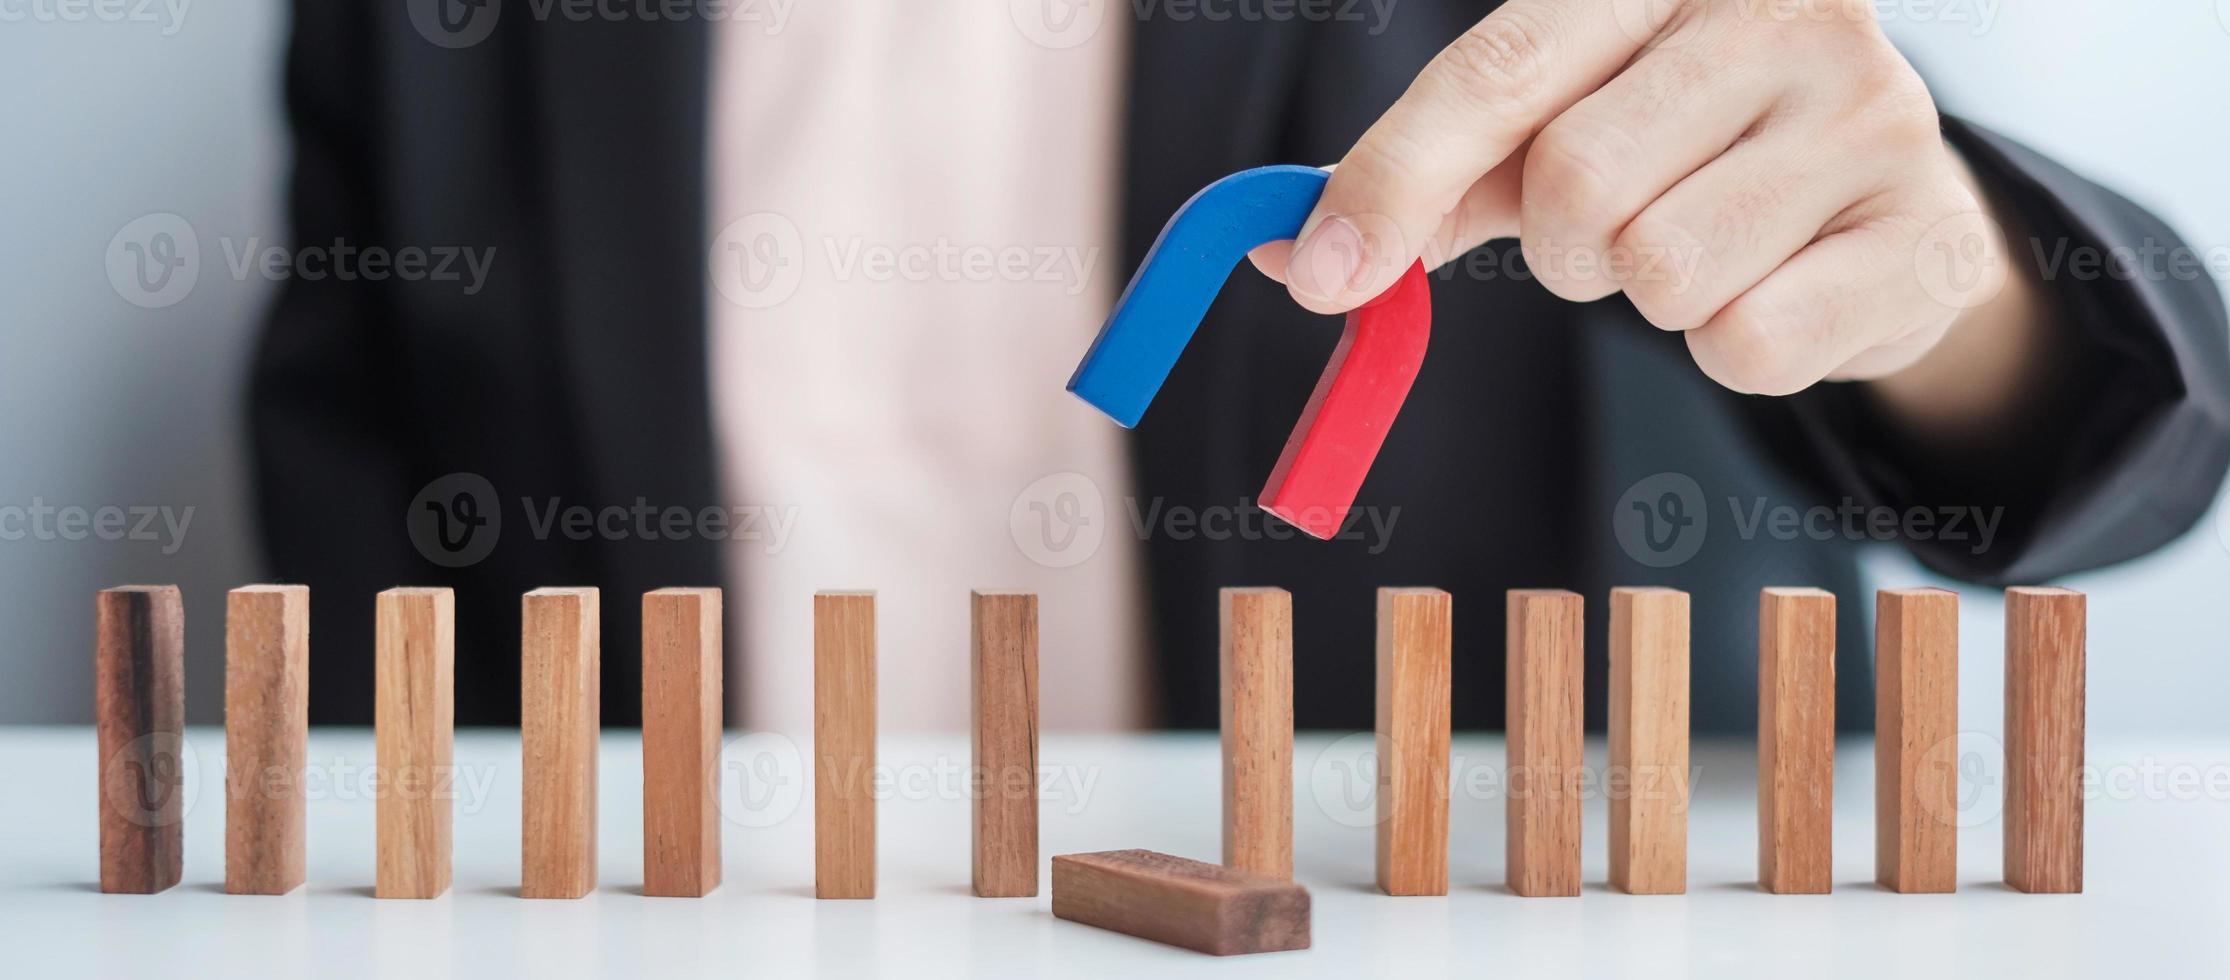 Business woman hand holding magnet and pulling man wooden figure from the crowd block. Business, Human resource management, Recruitment, Teamwork, strategy, toxic people and leadership Concepts photo